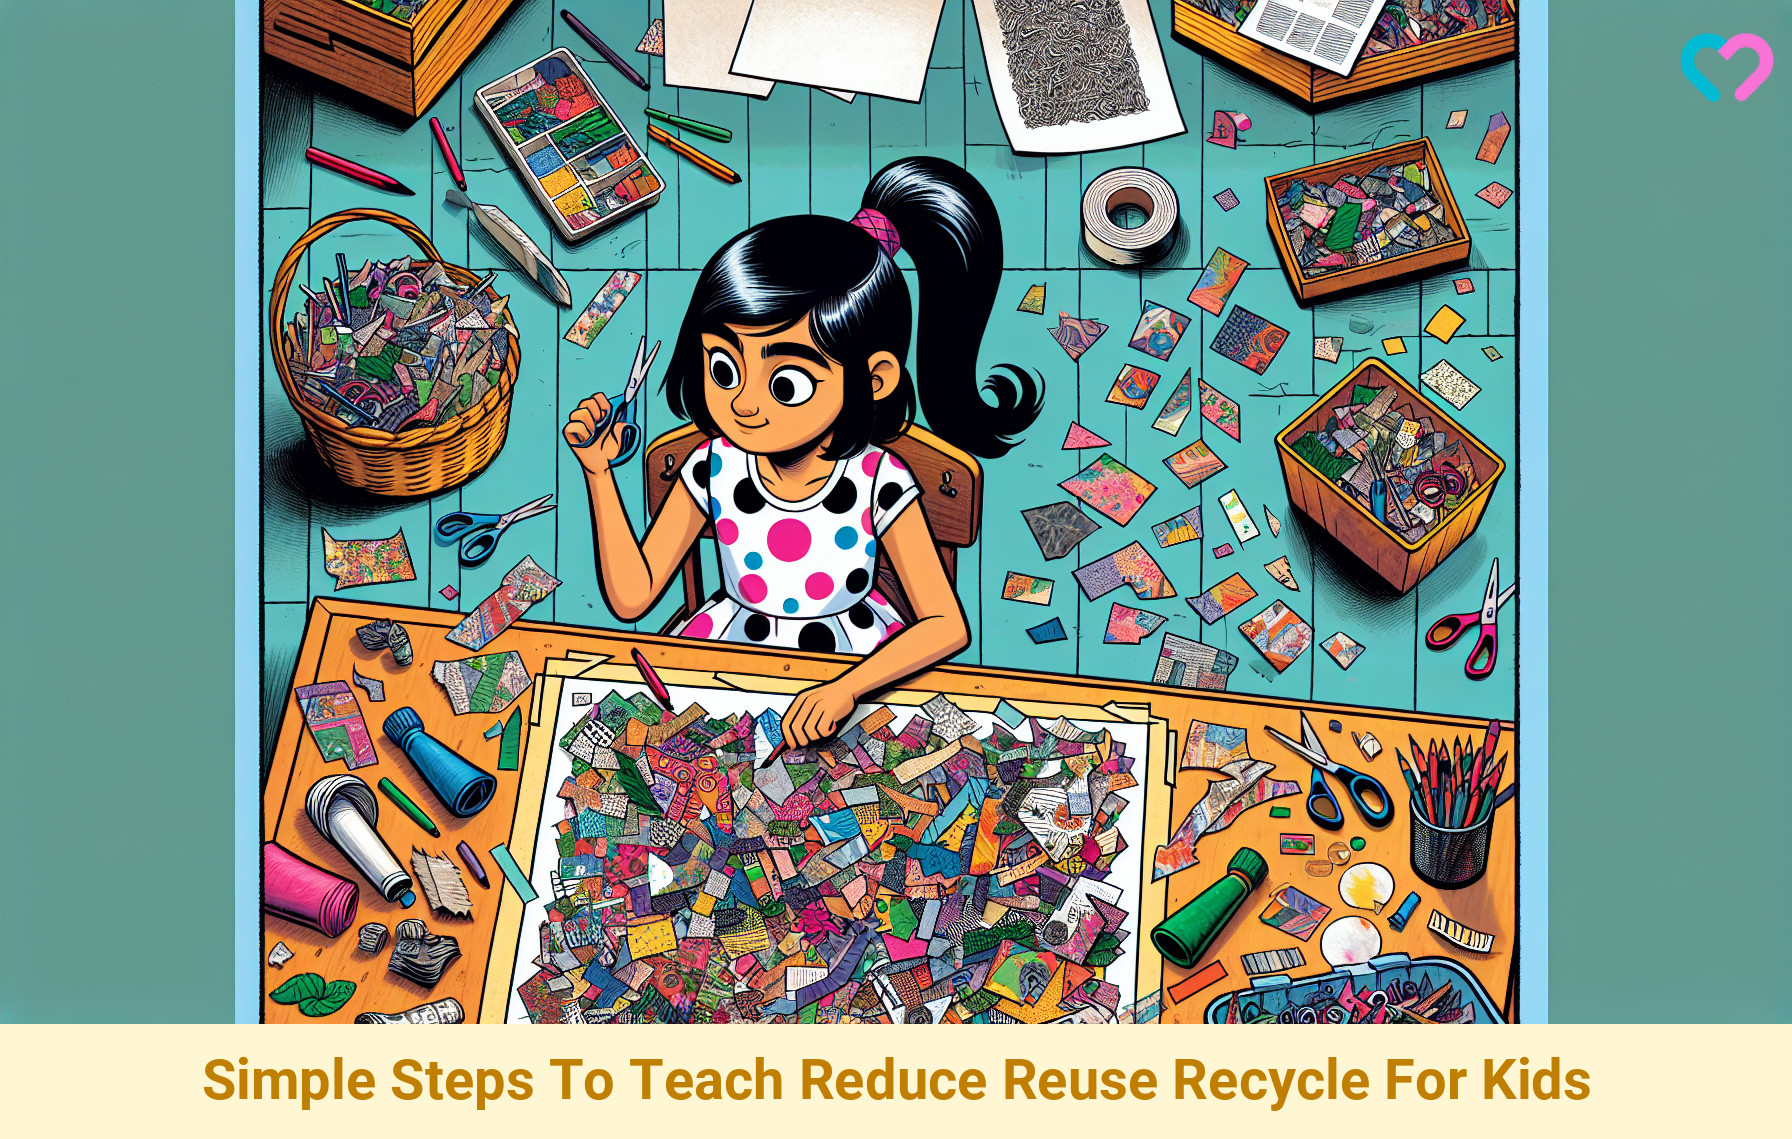 Reduce Reuse Recycle For Kids_illustration